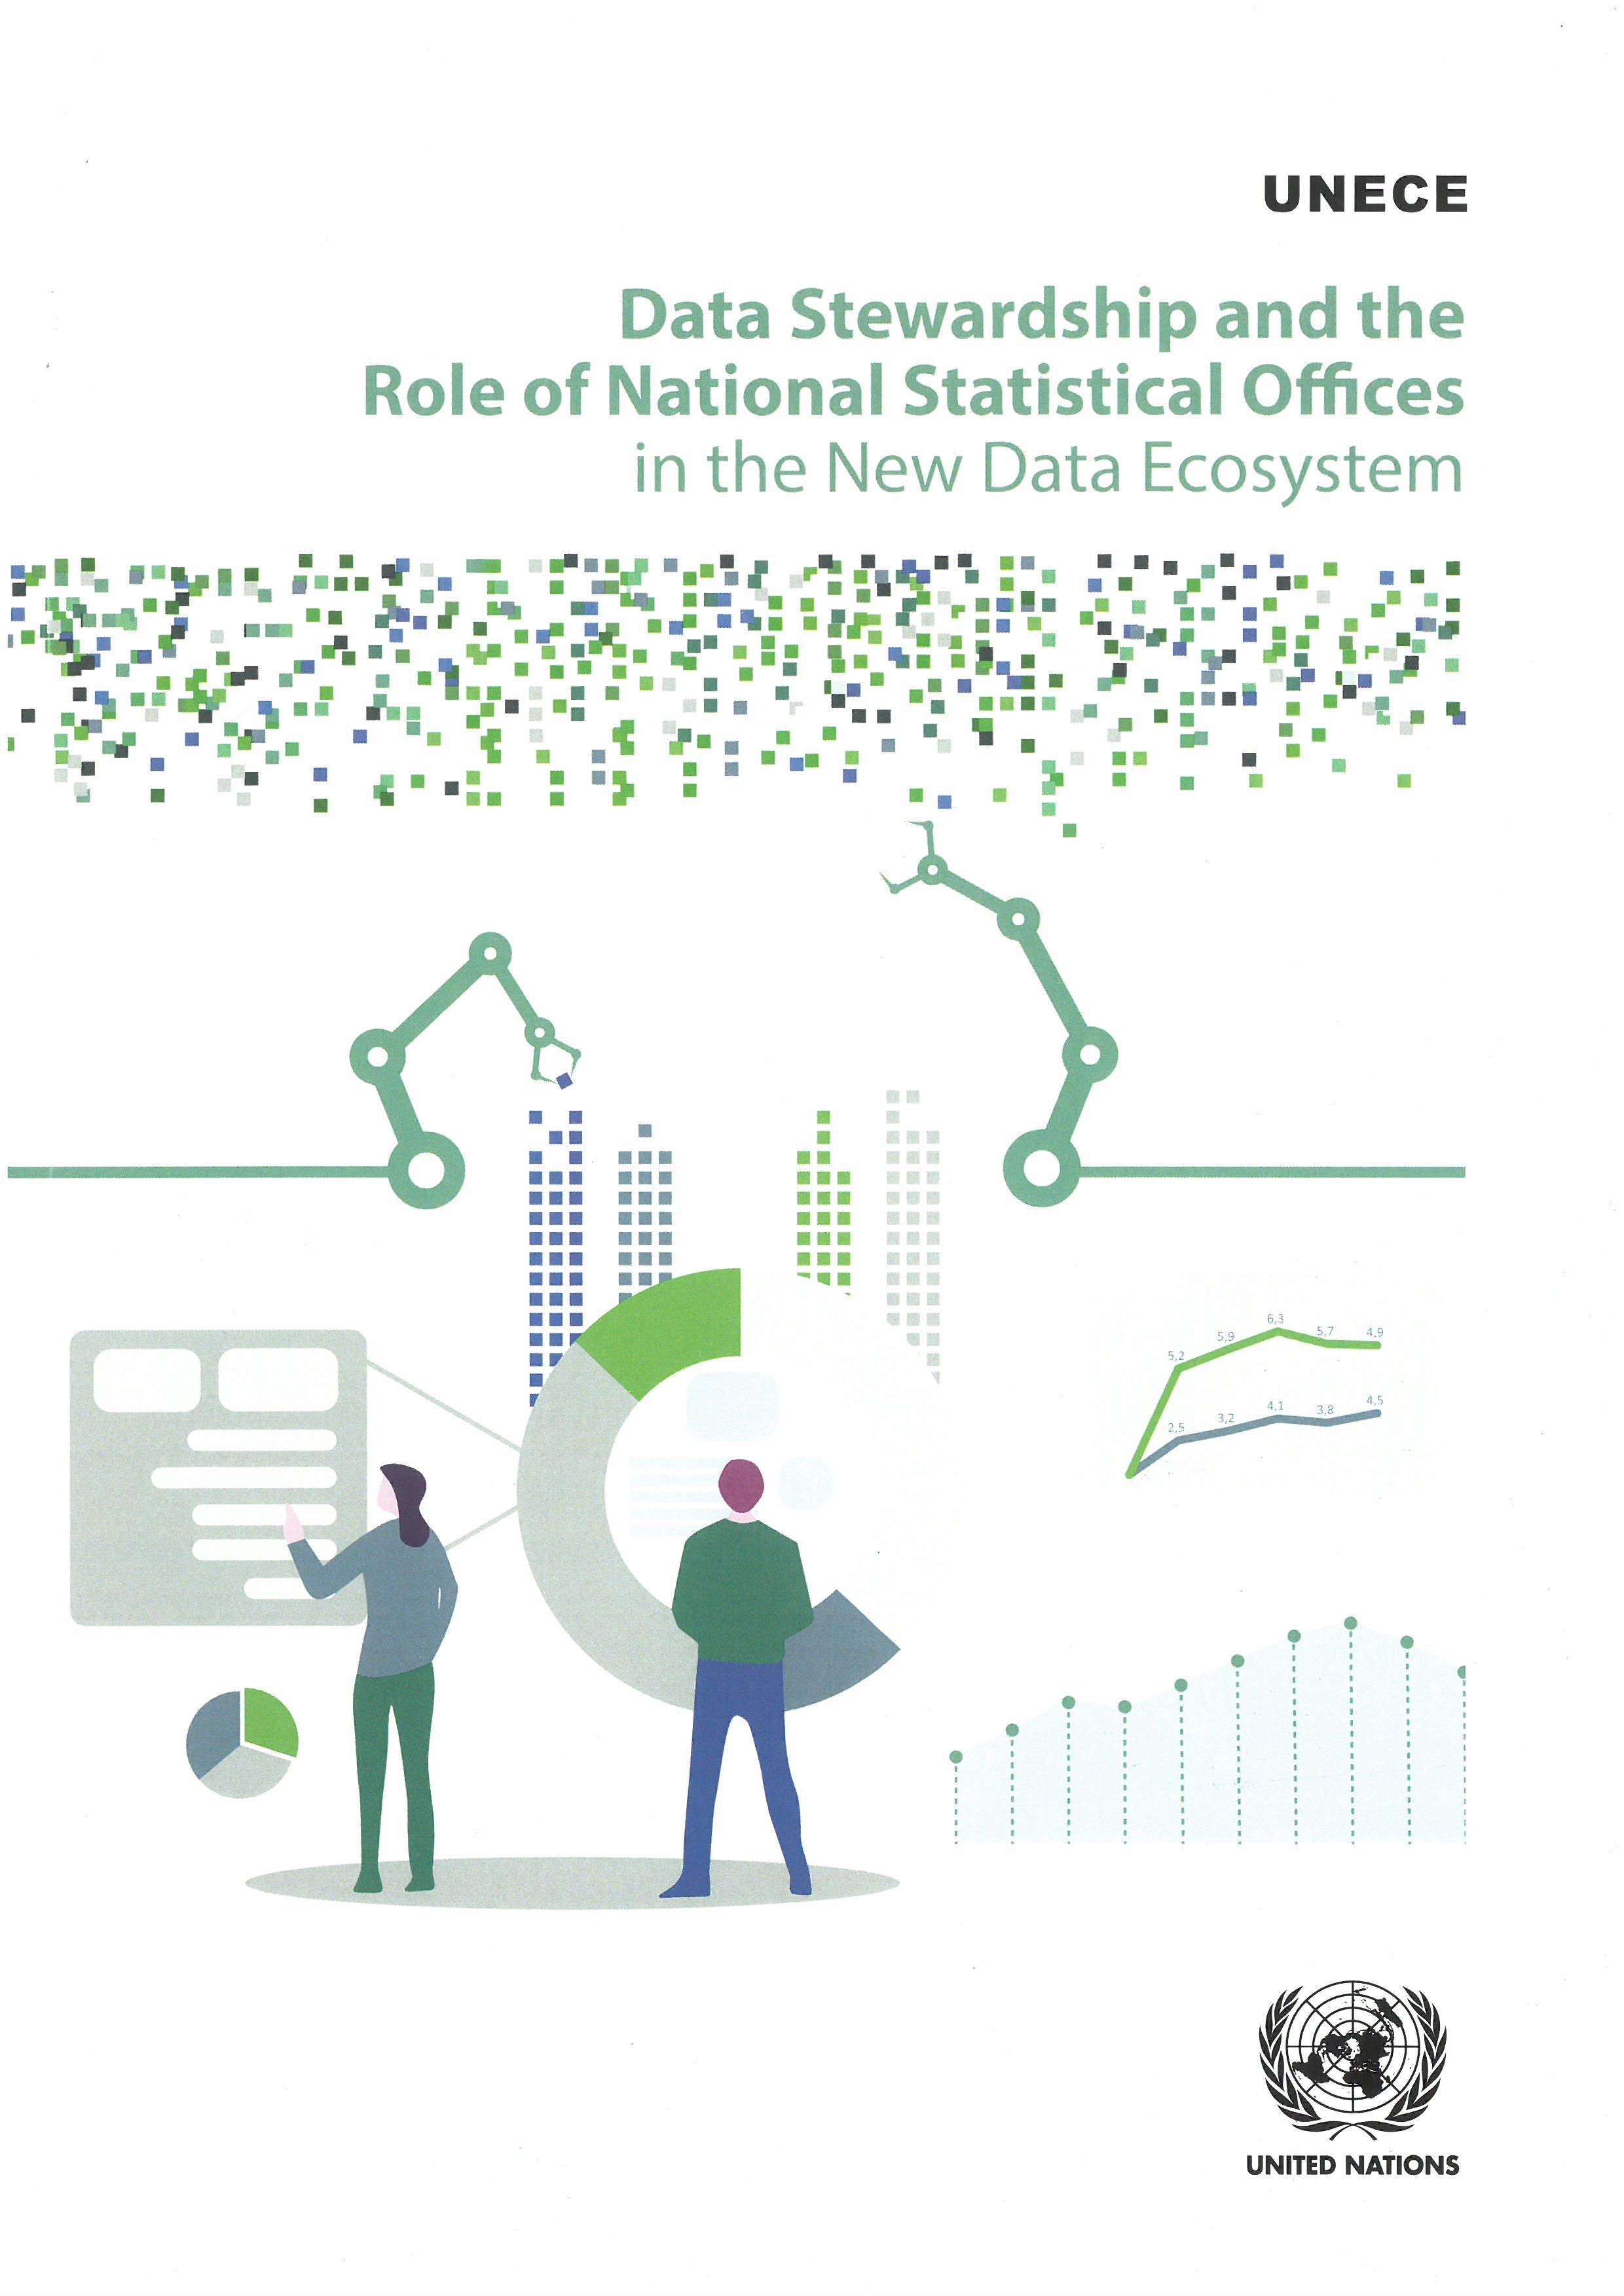 Data stewardship and the role of National Statistical Offices in the new data ecosystem 